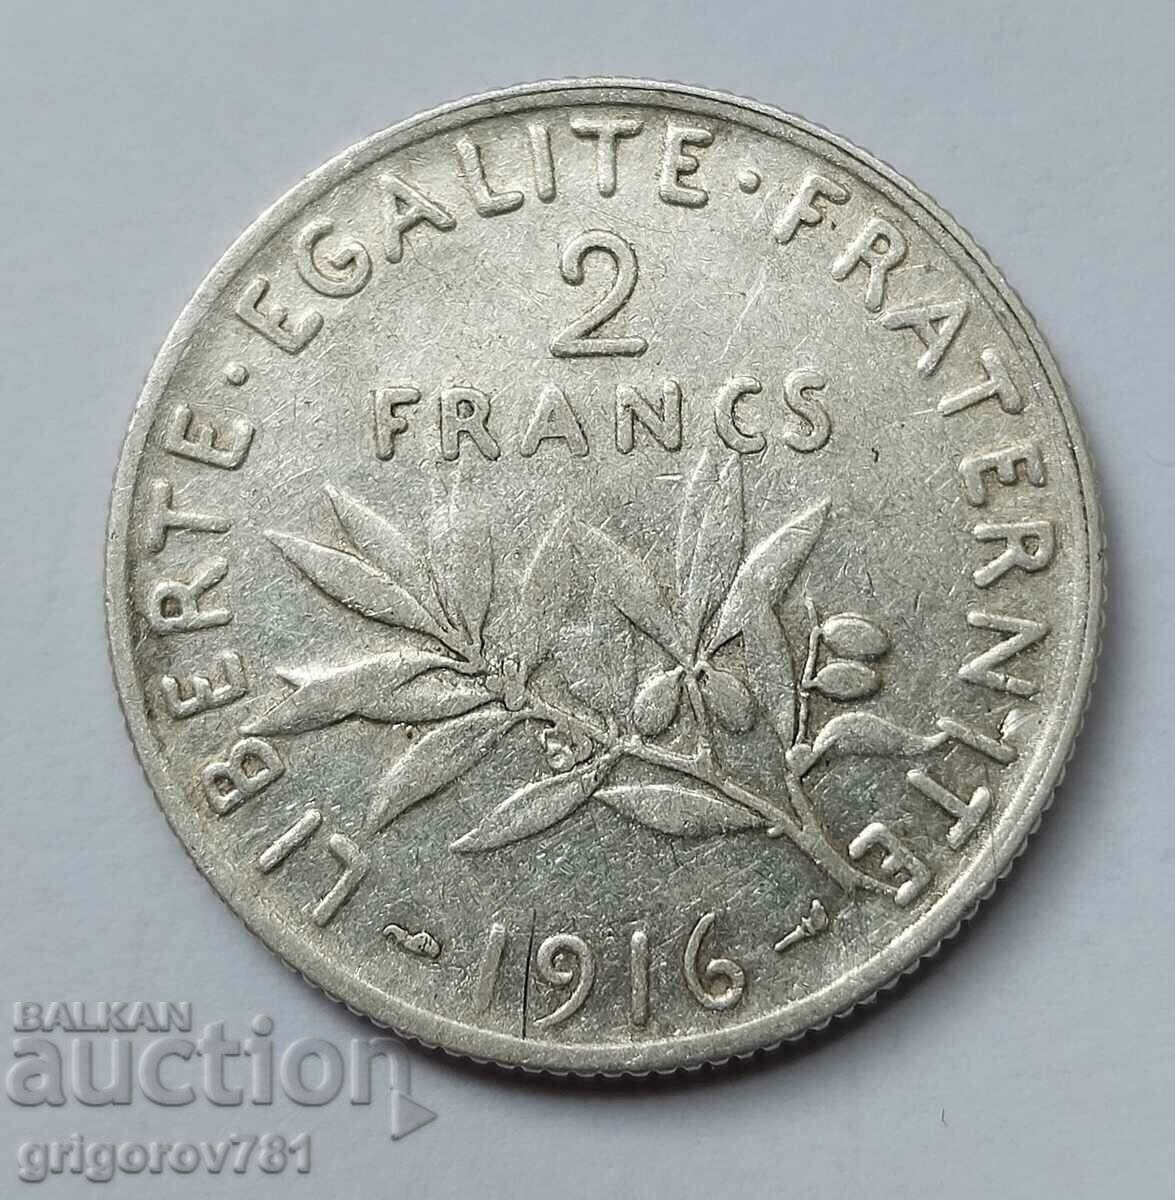 2 Francs Silver France 1916 - Silver Coin #85